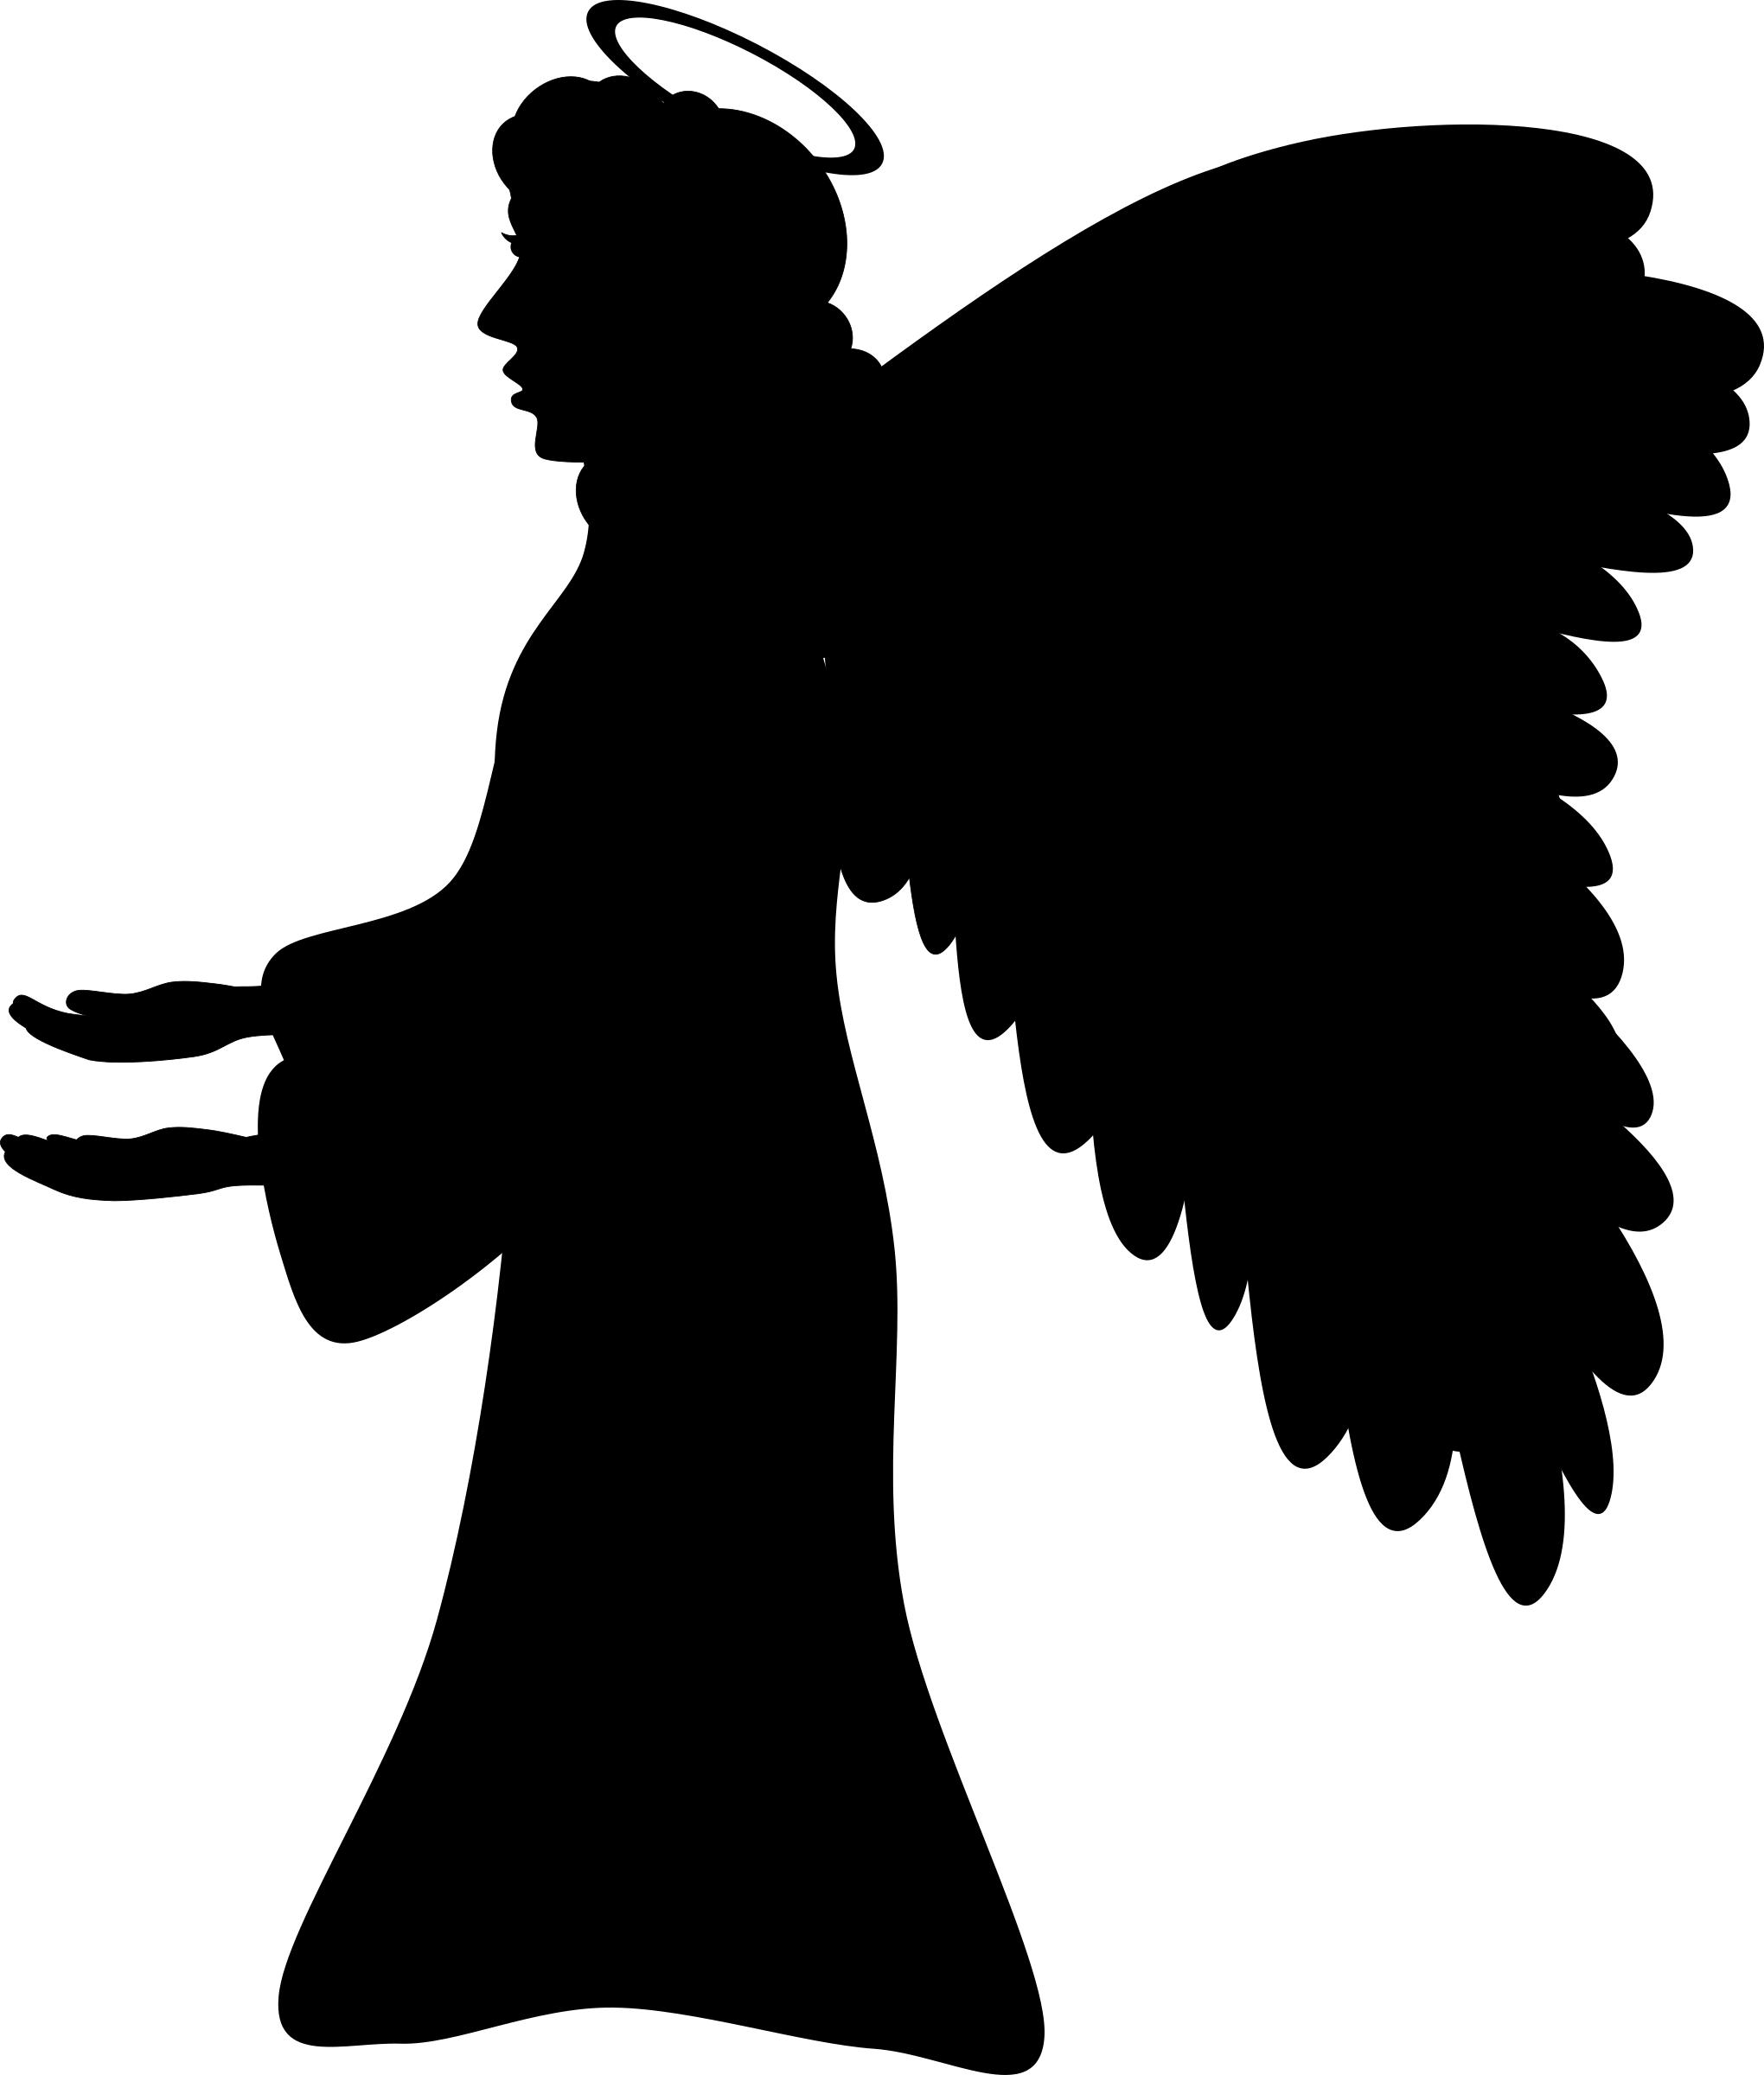 Child Angel Silhouette At Getdrawings Free Download